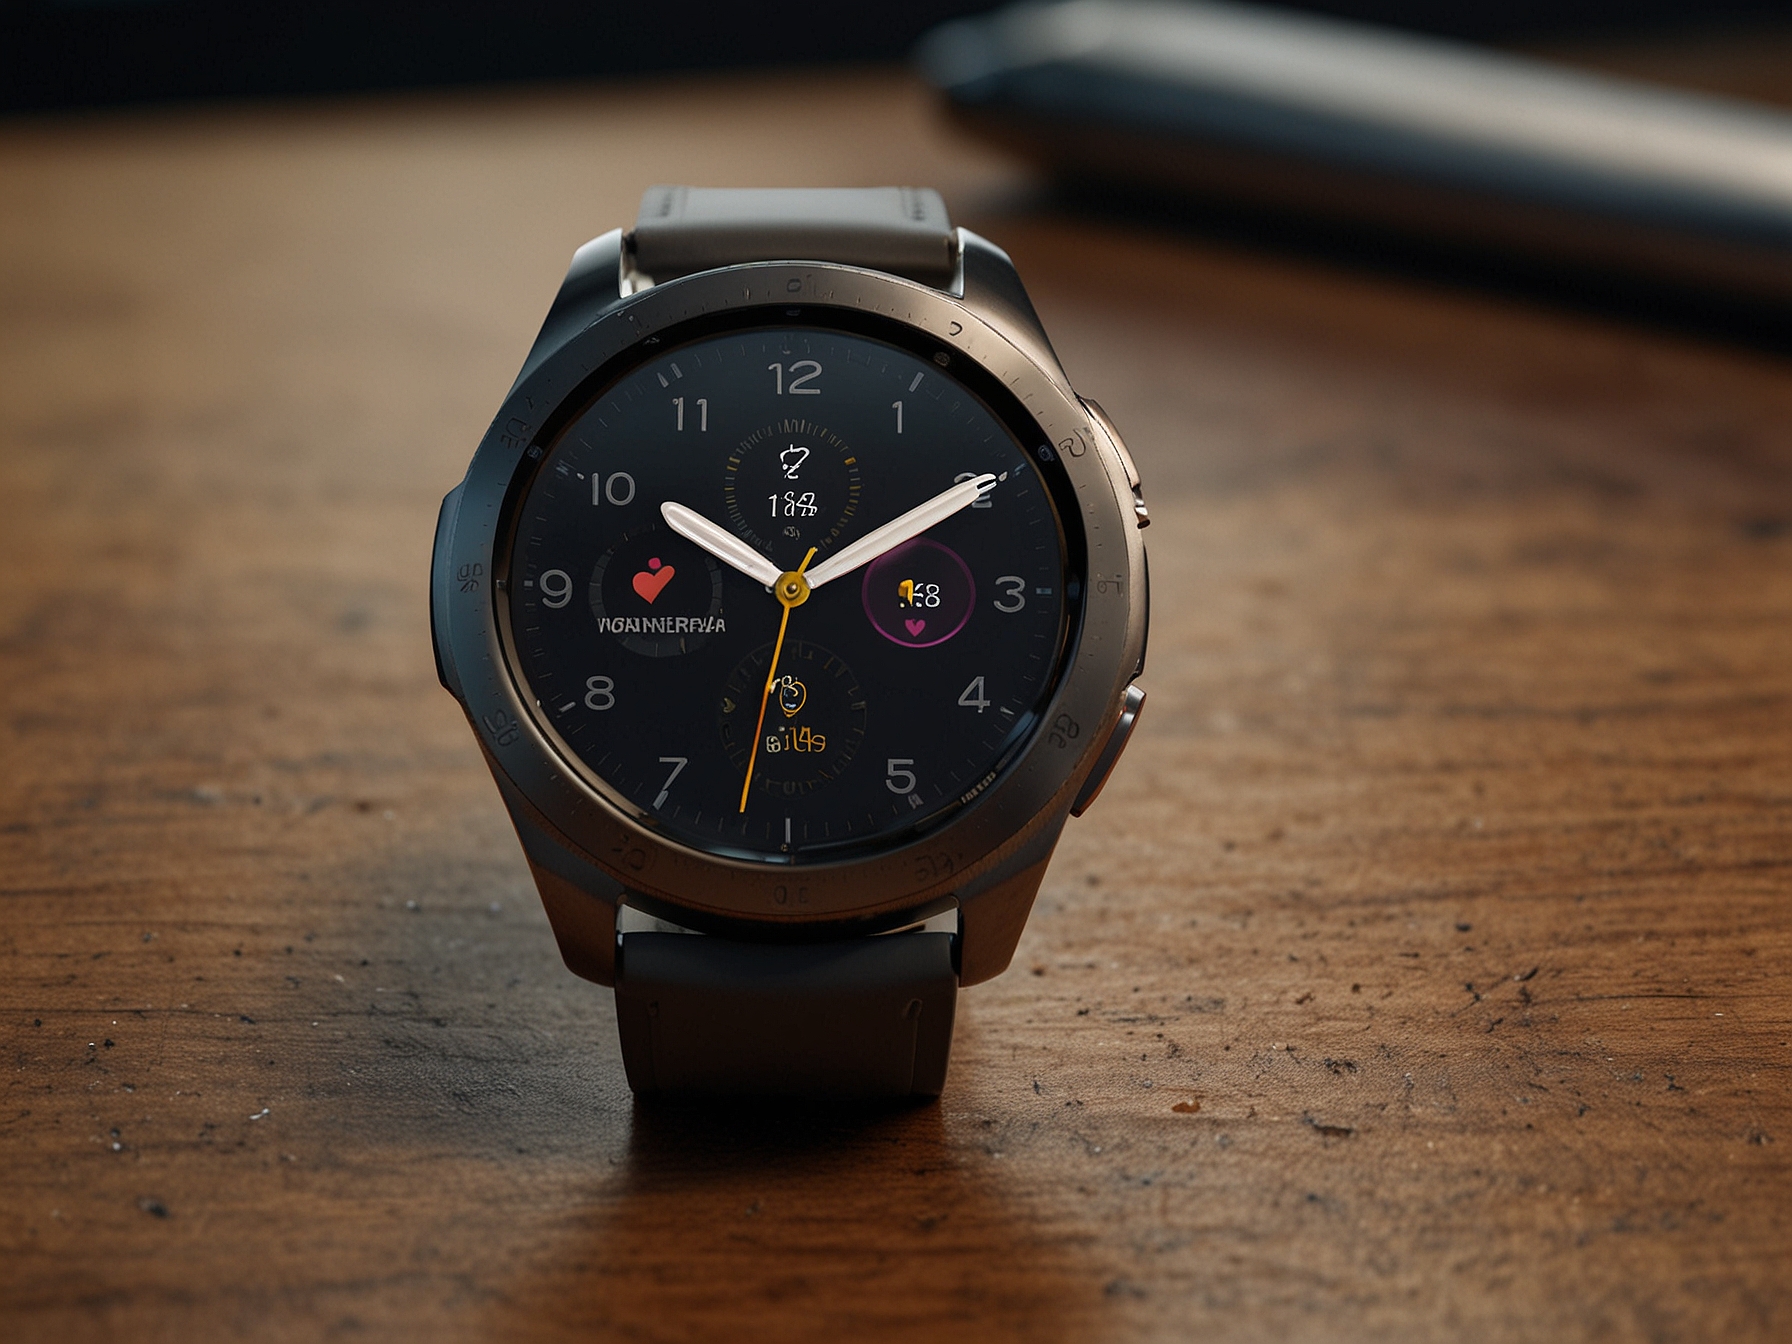 Illustration of the Galaxy Watch 7's new health sensors, including a heart rate monitor, blood pressure tracking, and potentially glucose level monitoring, emphasizing the wearable's focus on health and wellness.